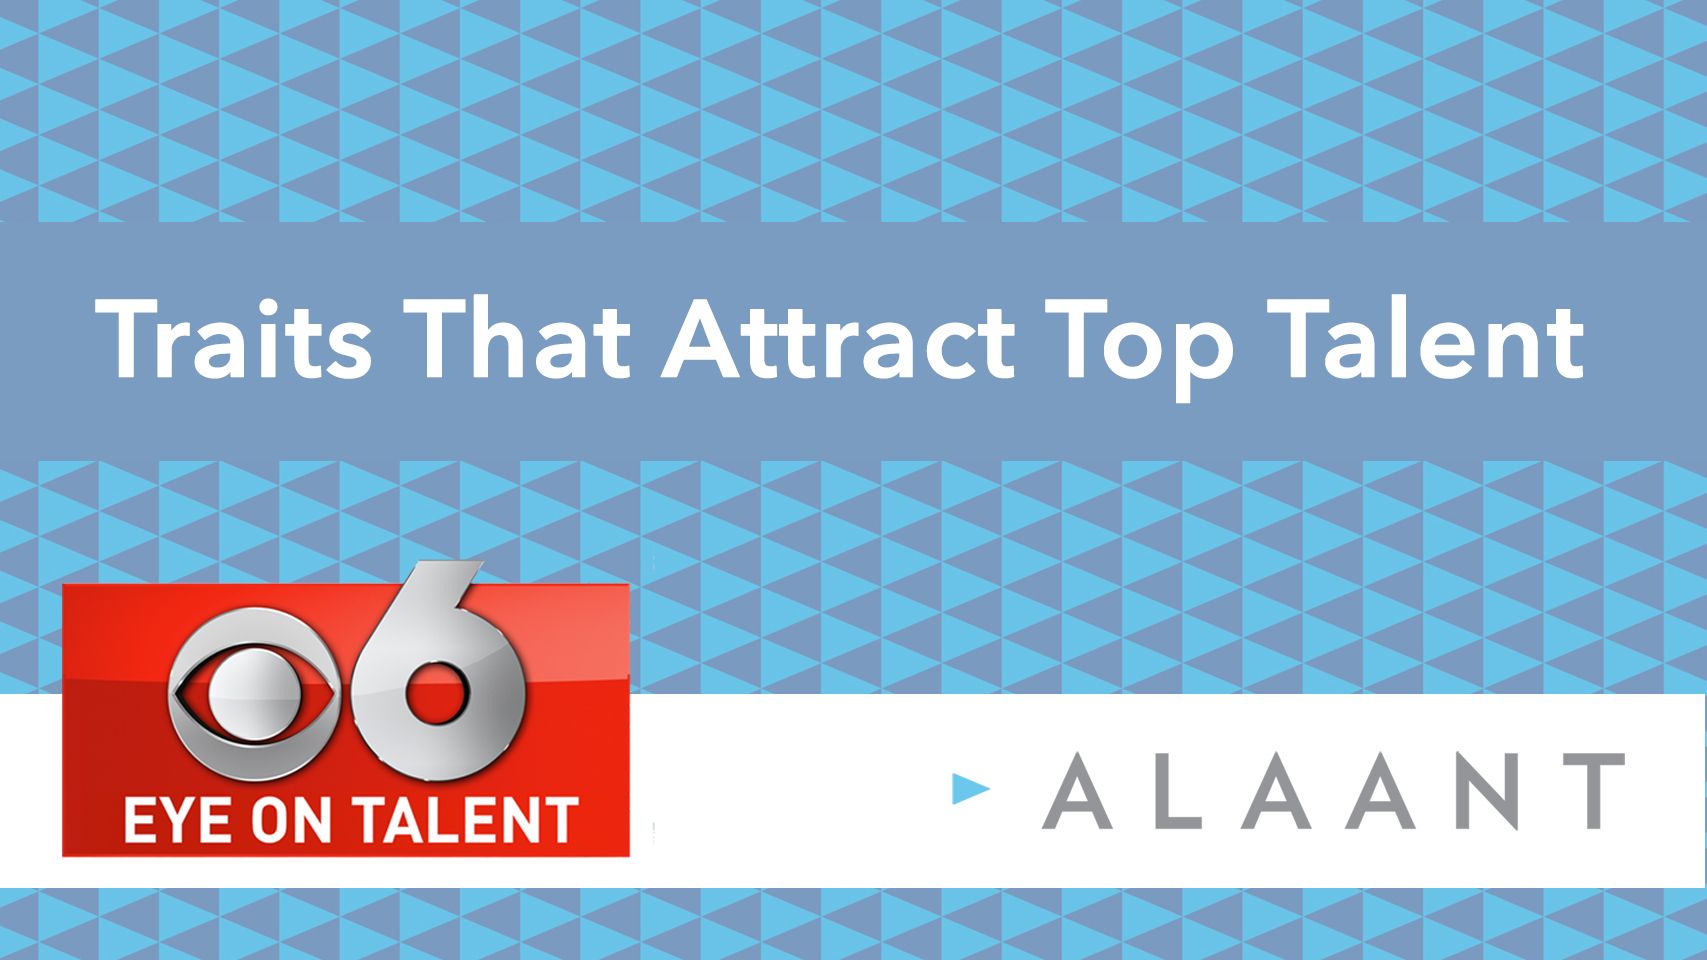 Alaant Eye on Talent Traits That Attract Top Talent